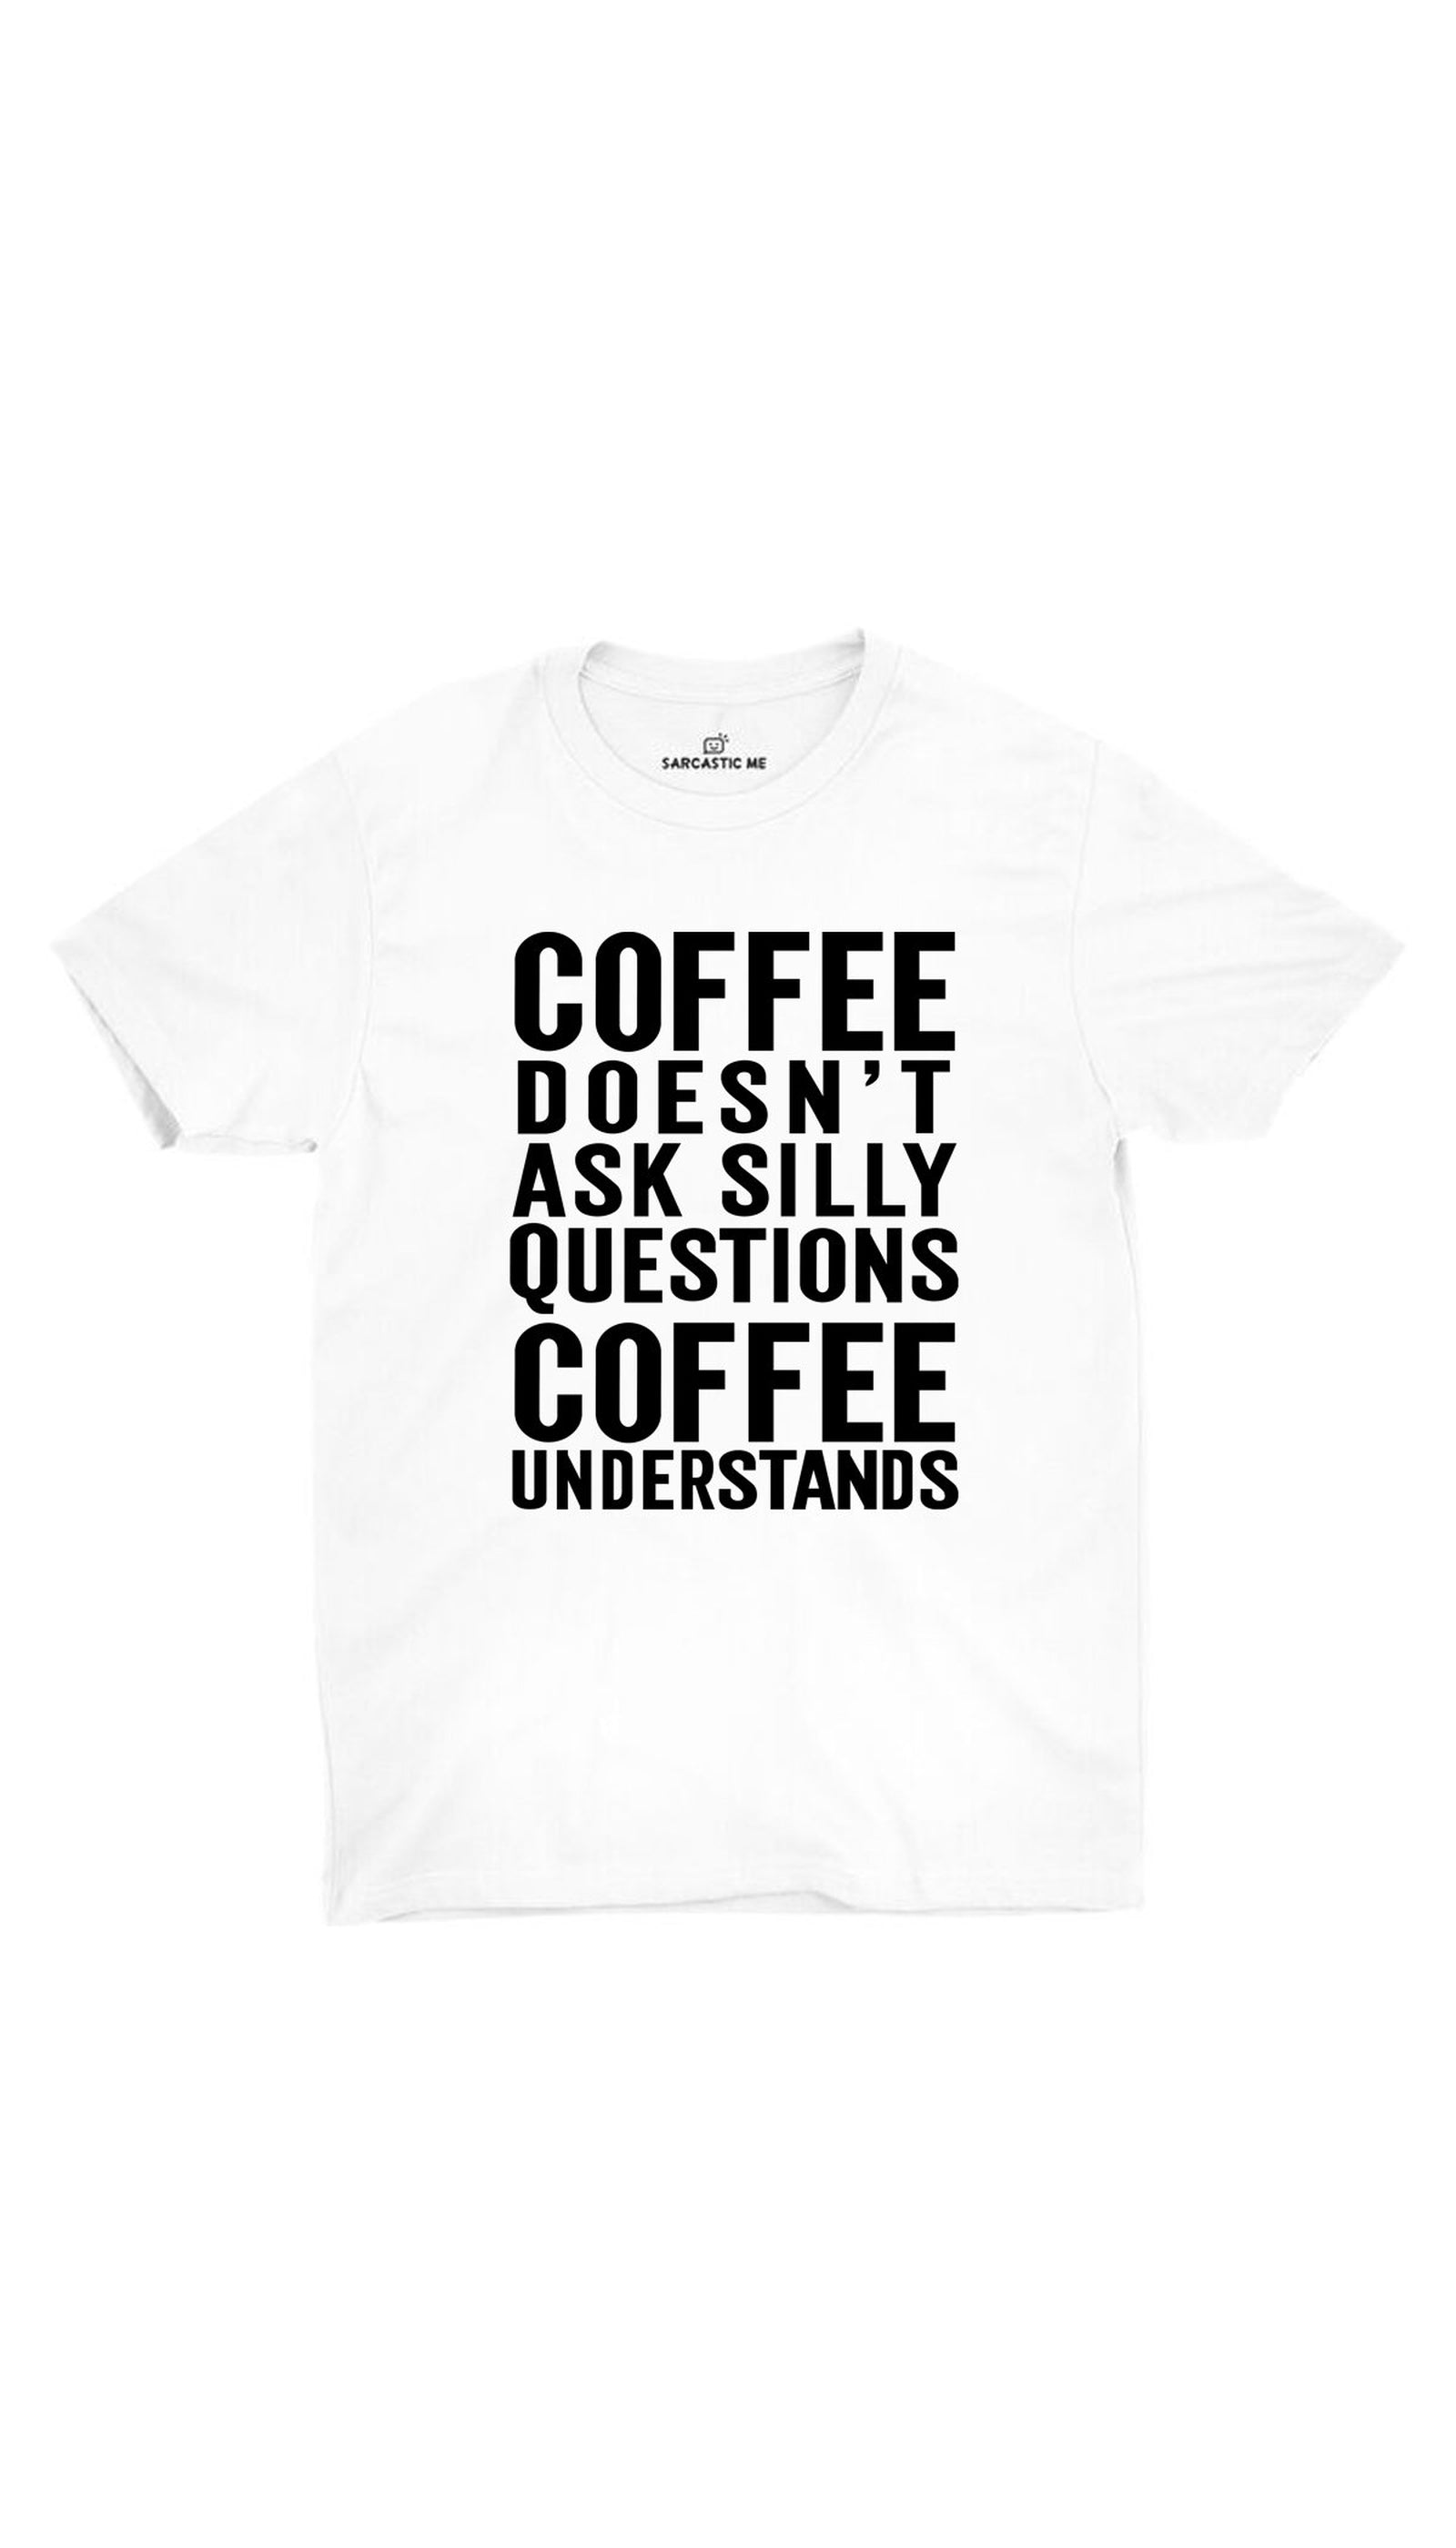 Coffee Doesn't Ask Silly Questions White Unisex T- Shirt | Sarcastic ME